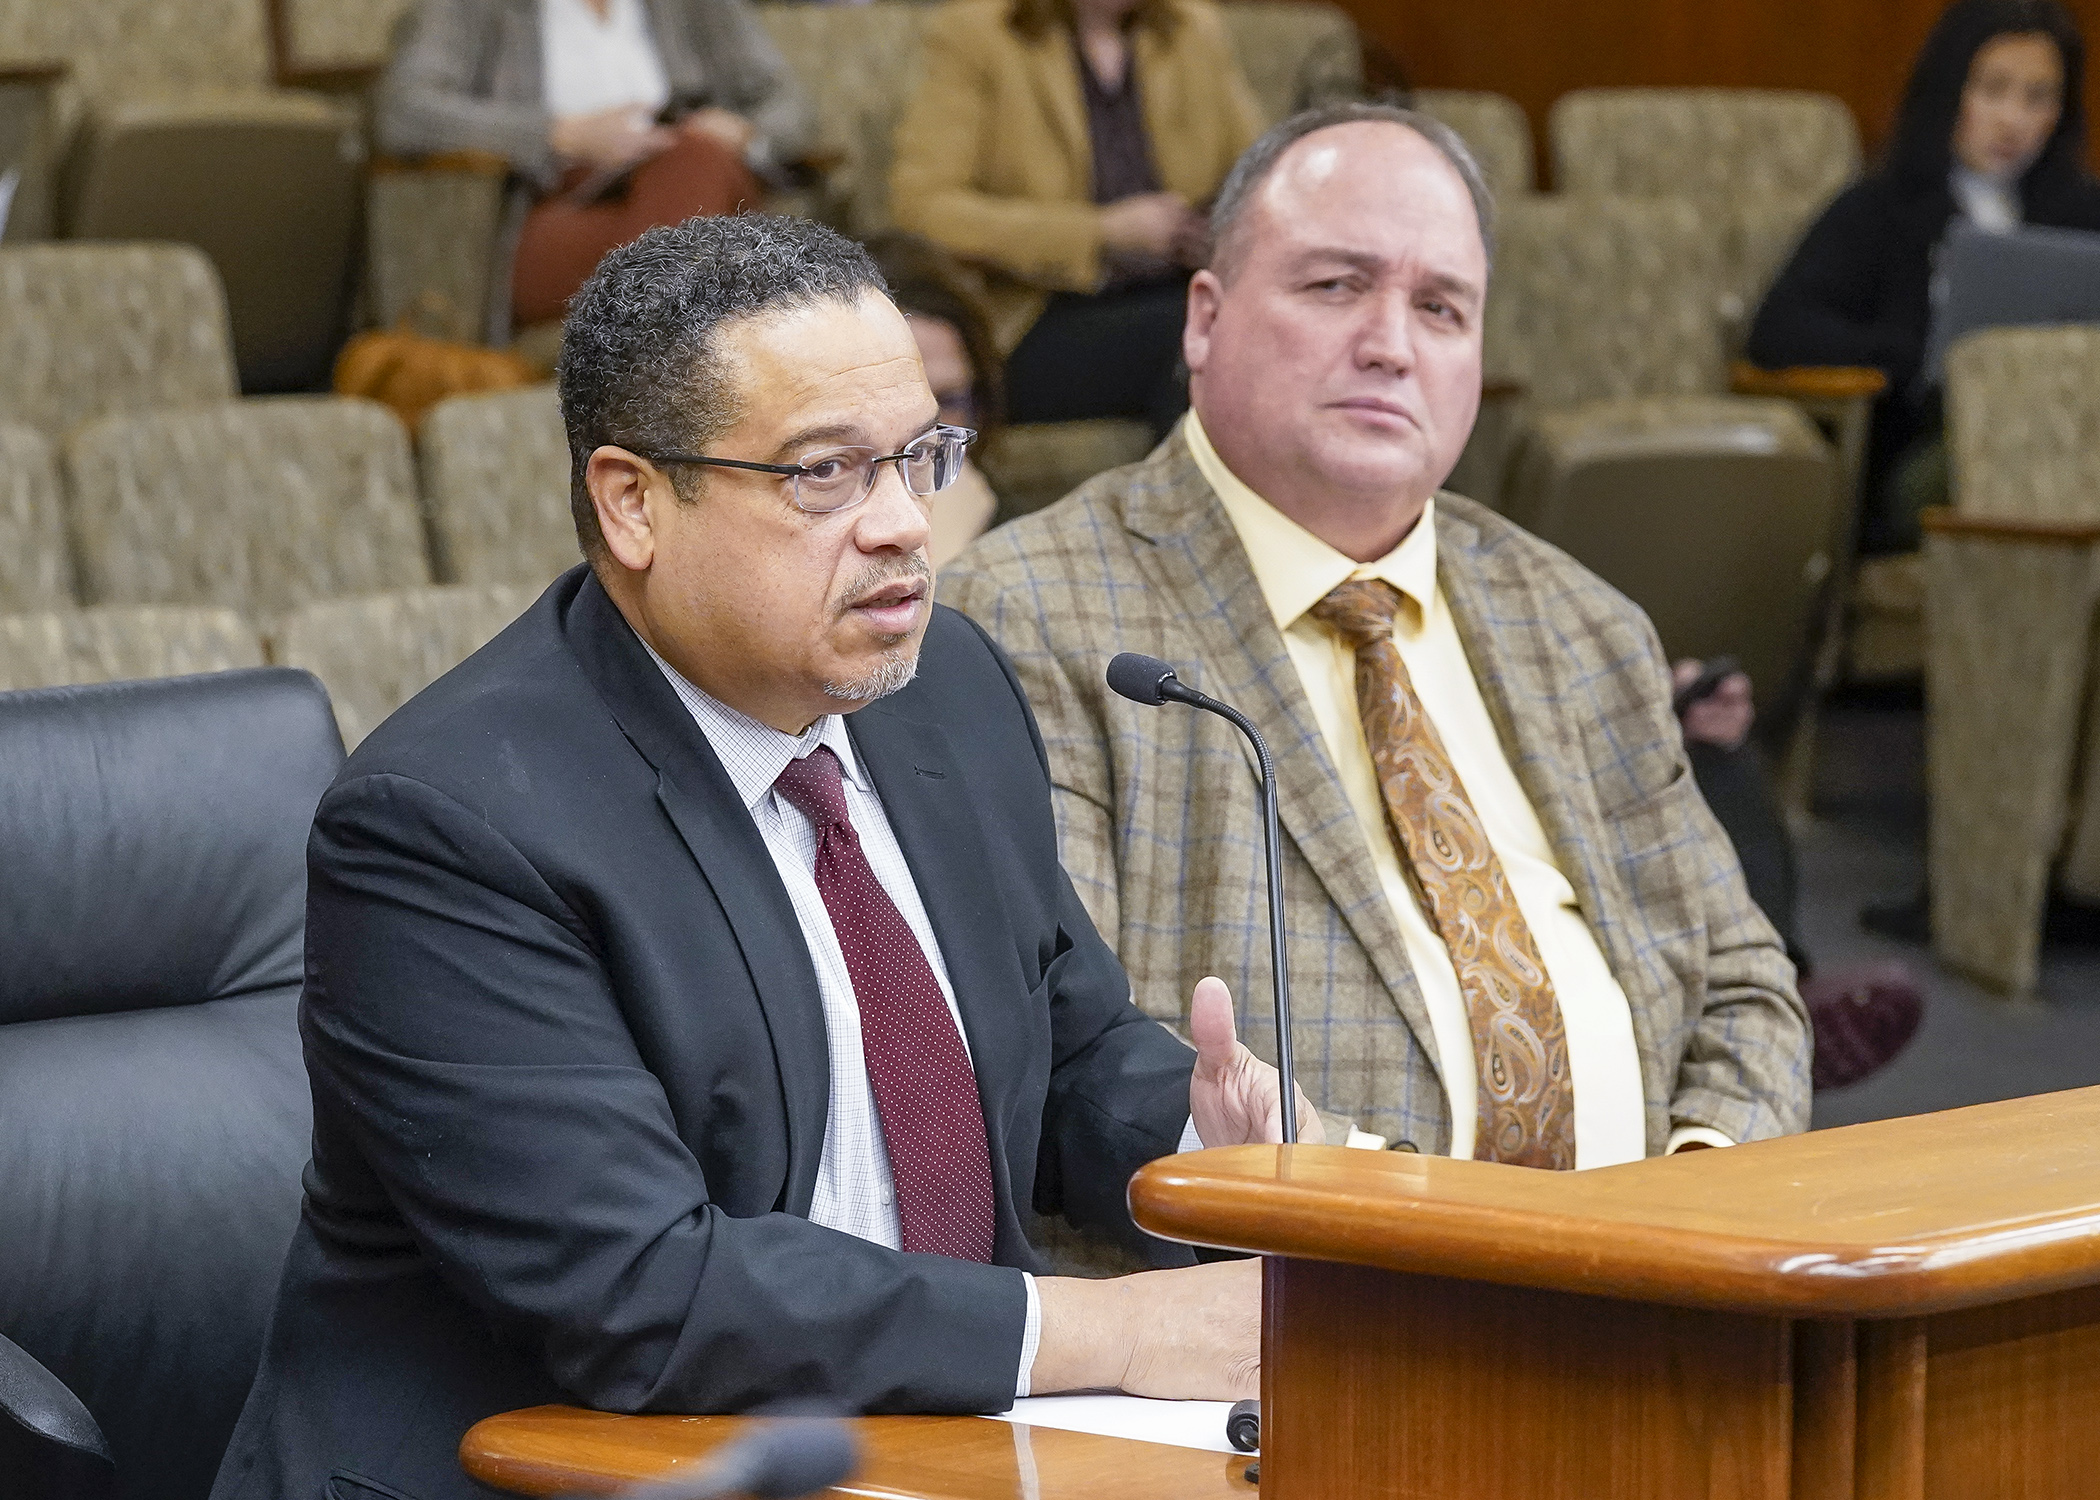 Minnesota Attorney General Keith Ellison pictured testifying before lawmakers Jan. 17. (House Photography file photo)